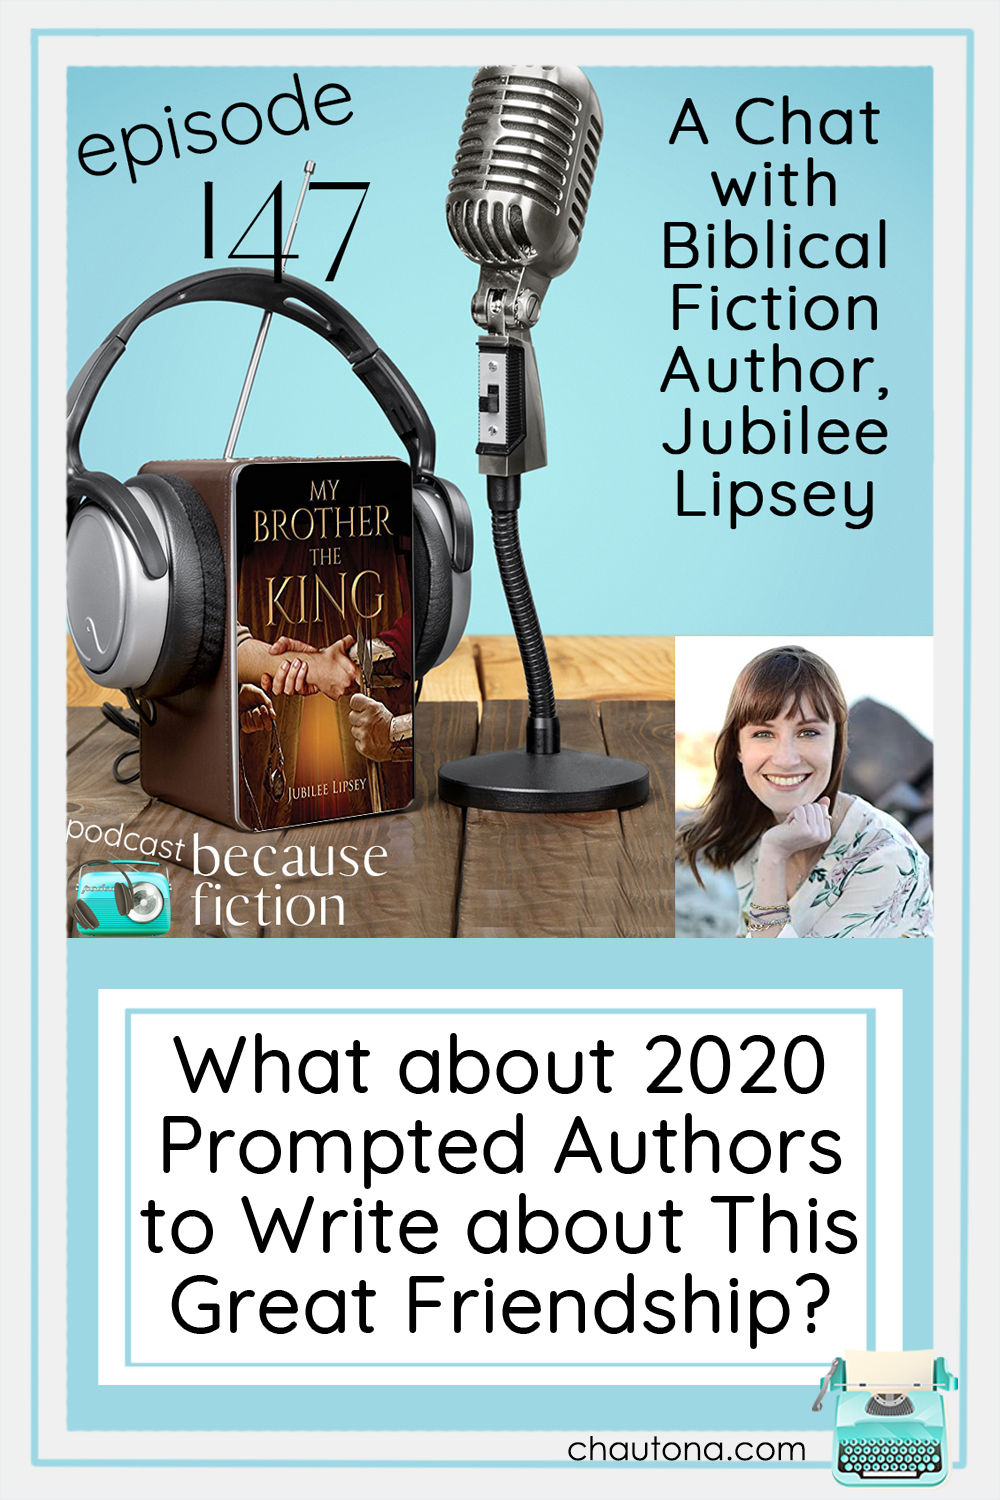 Jubilee Lipsey has loved the story of Joseph all her life, so why did she write her first series about David and Jonathan instead? via @chautonahavig